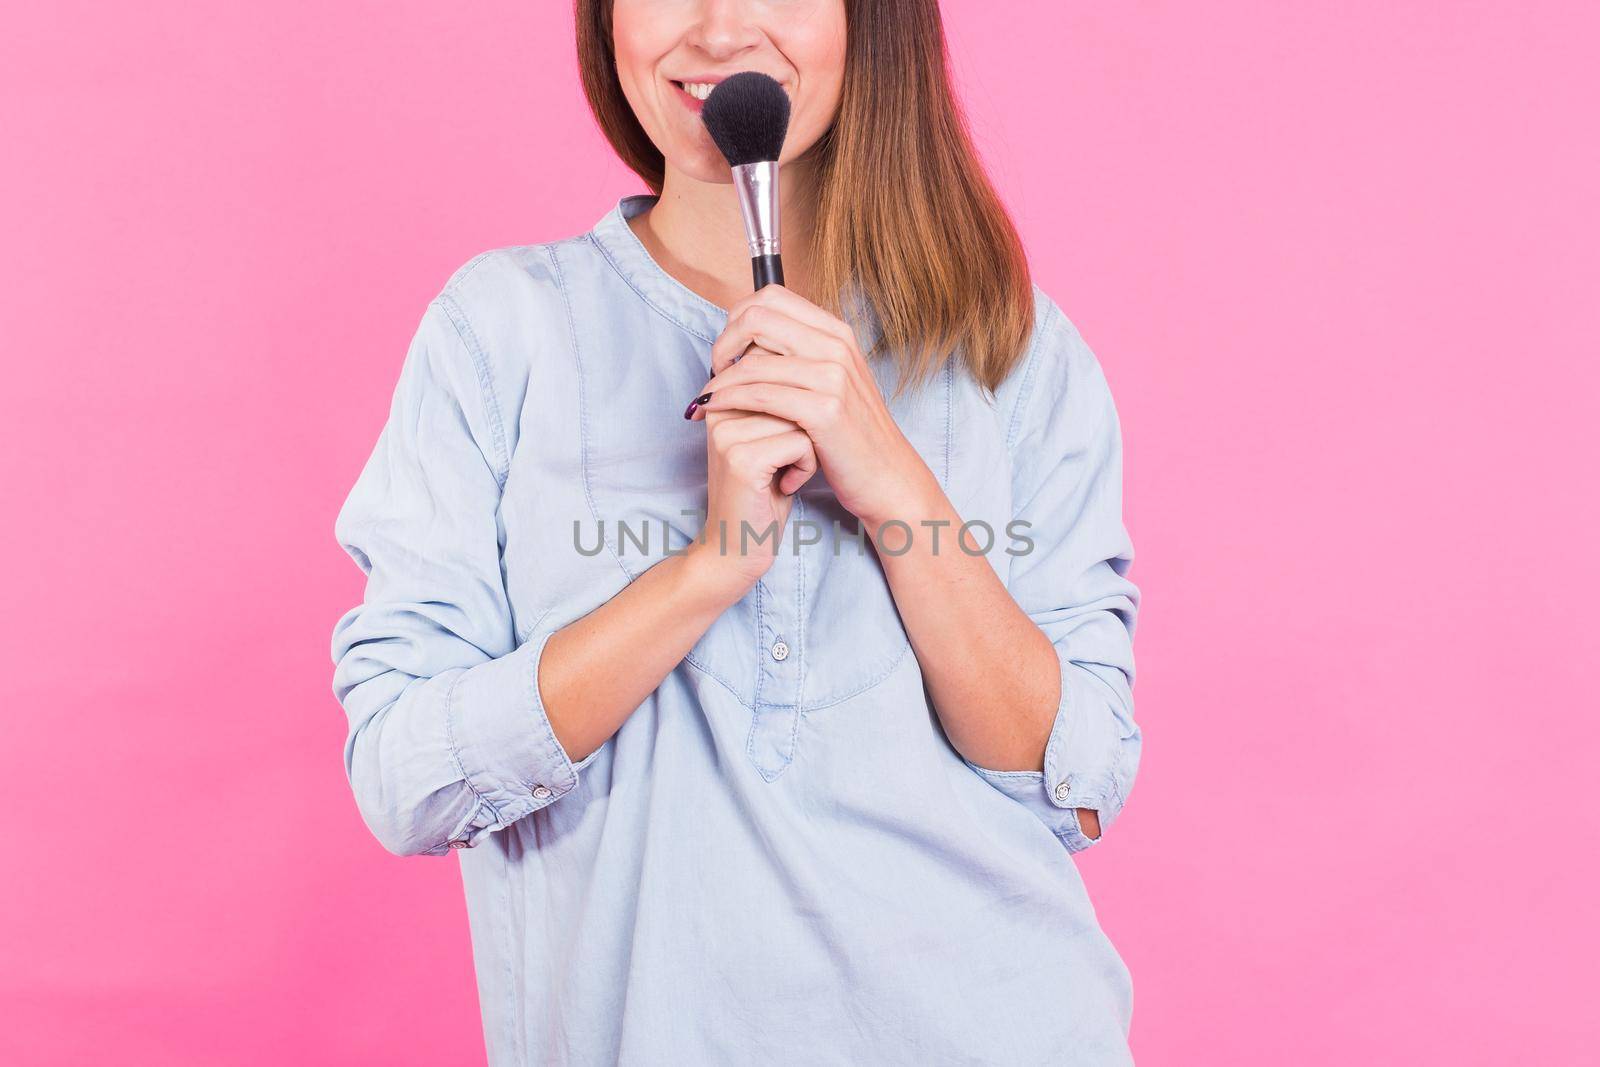 Professional makeup artist with brushes on pink background.